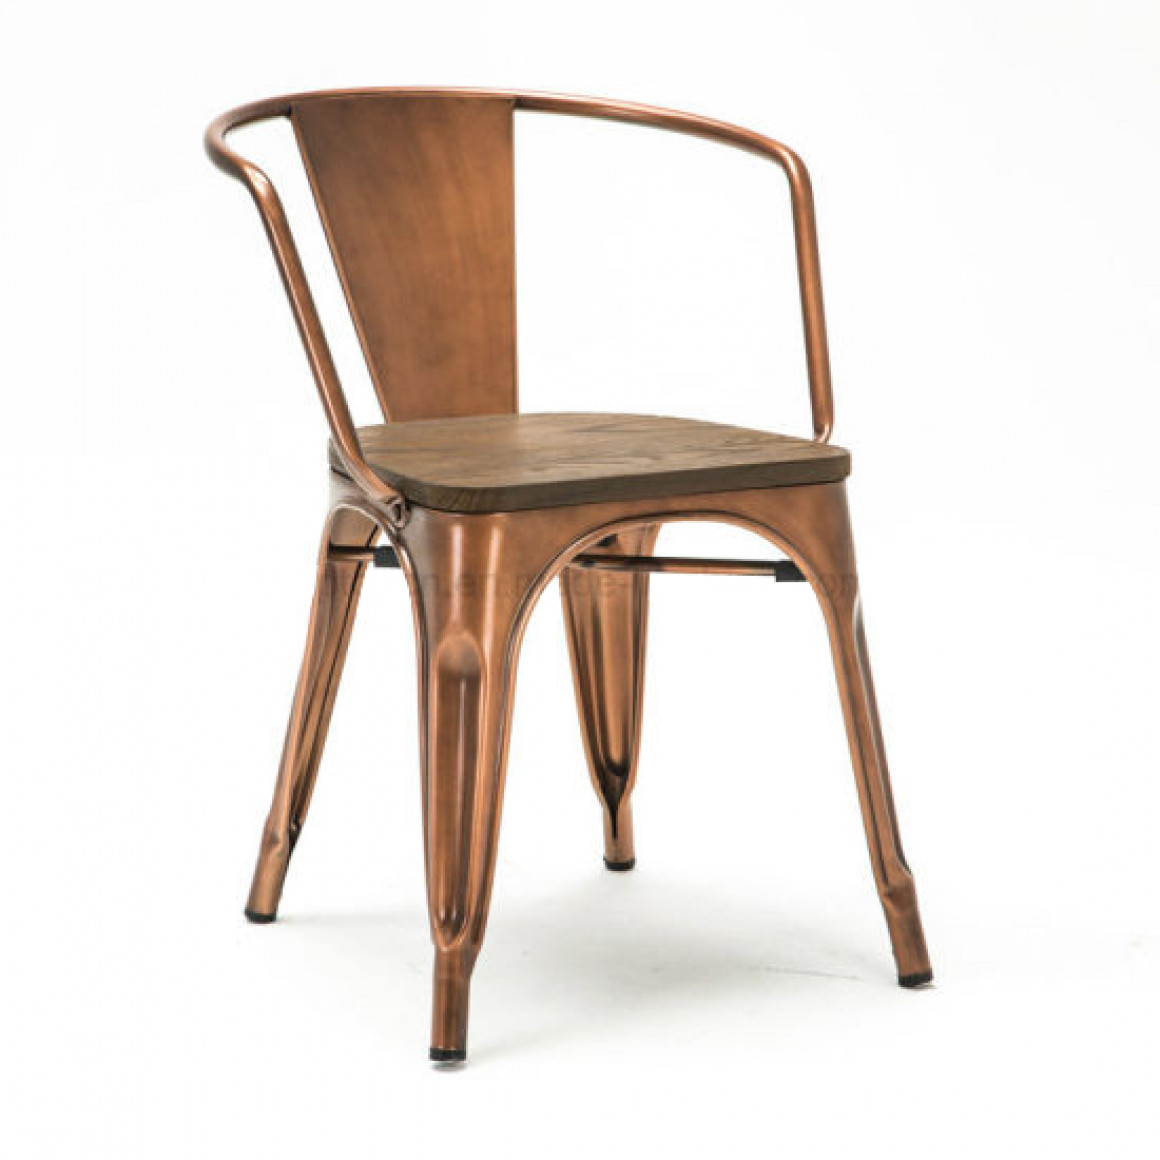 Chair: steel frame, elm wood seat,red brass